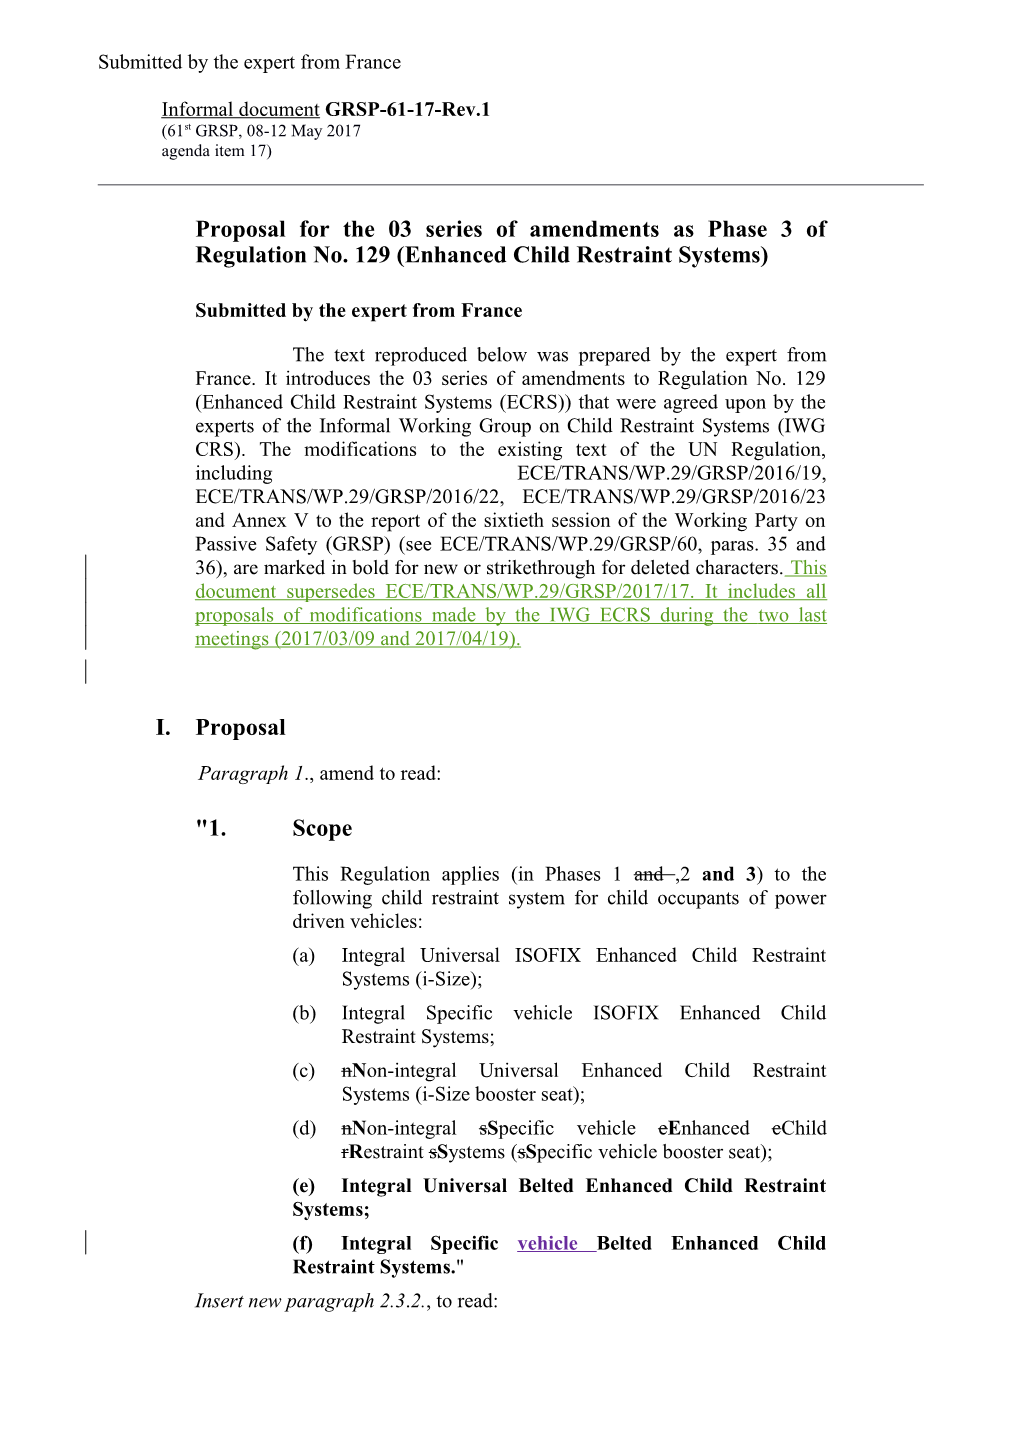 Proposal for the 03 Series of Amendments As Phase 3 of Regulation No.129 (Enhanced Child